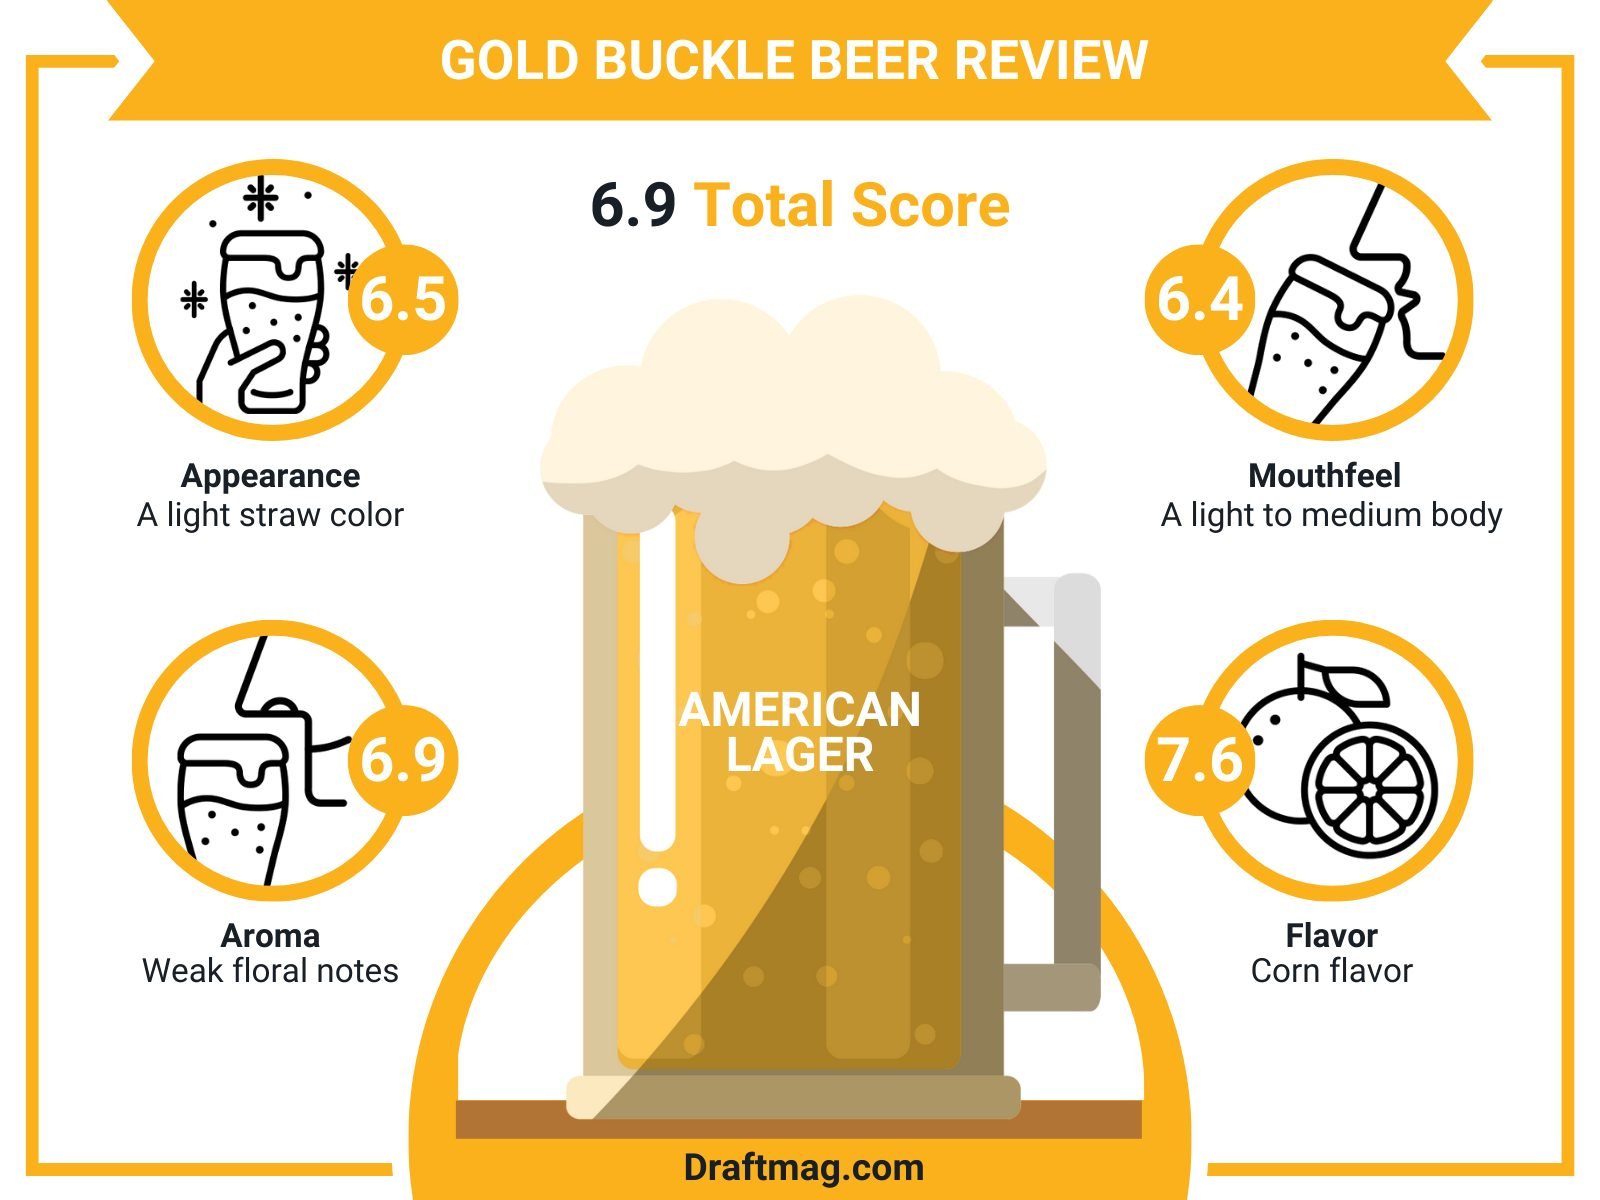 Gold Buckle Beer Review Infographic